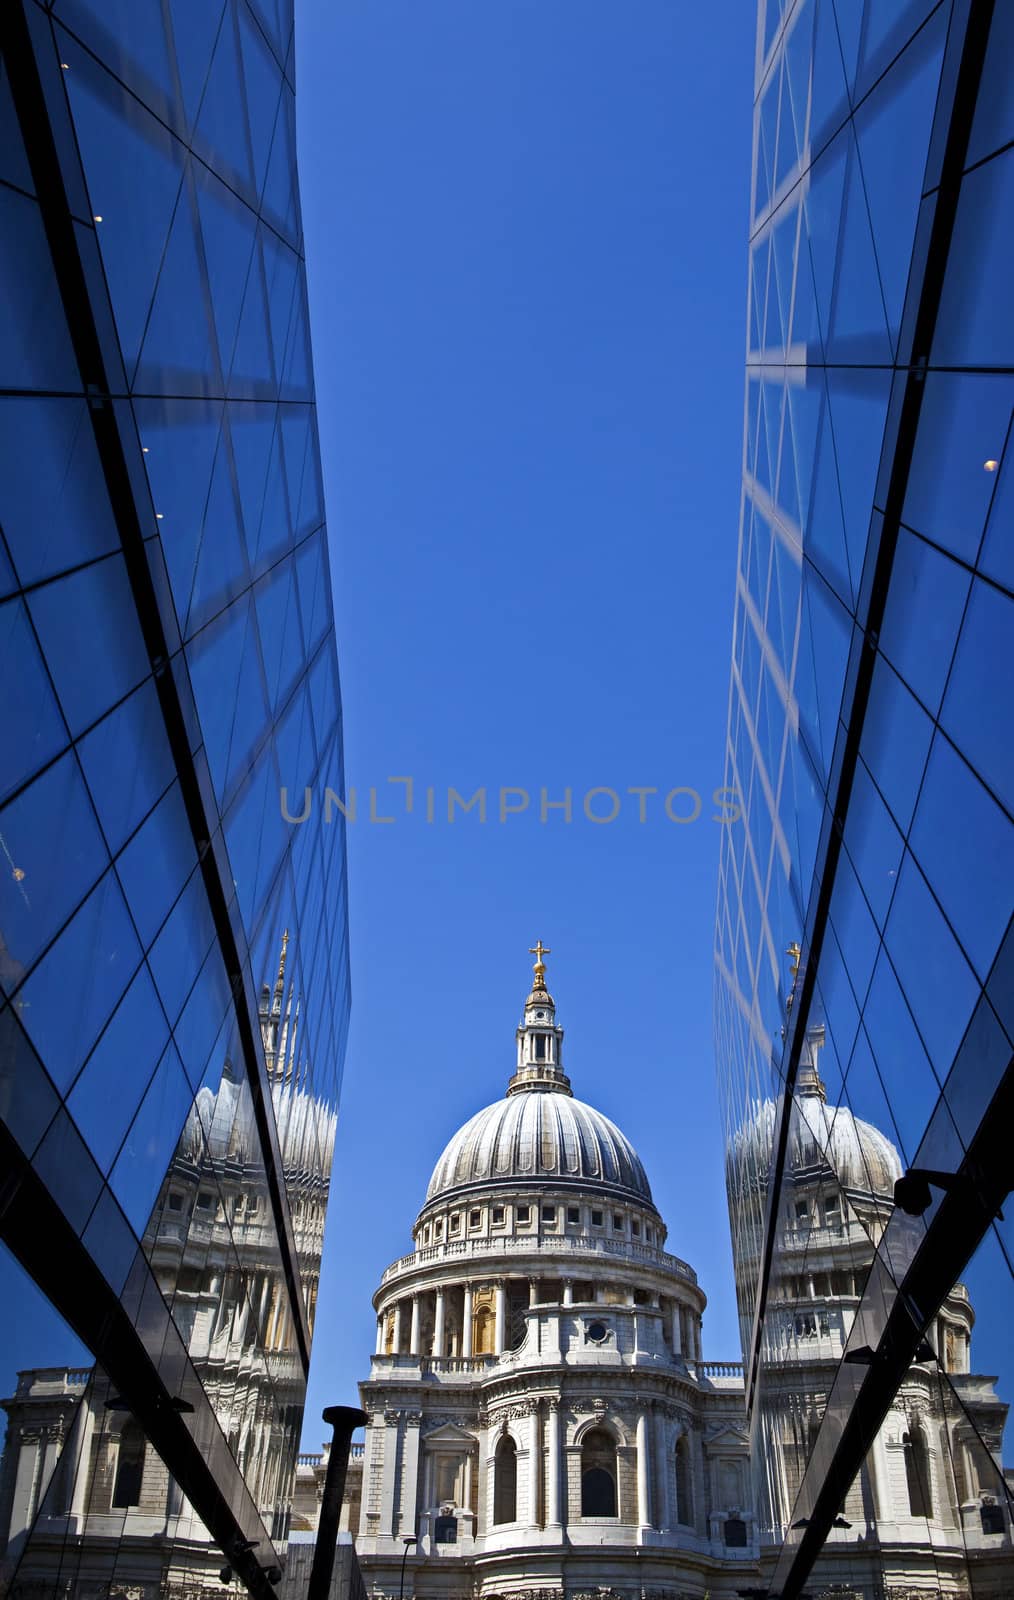 View of St. Paul's Cathedral in London.